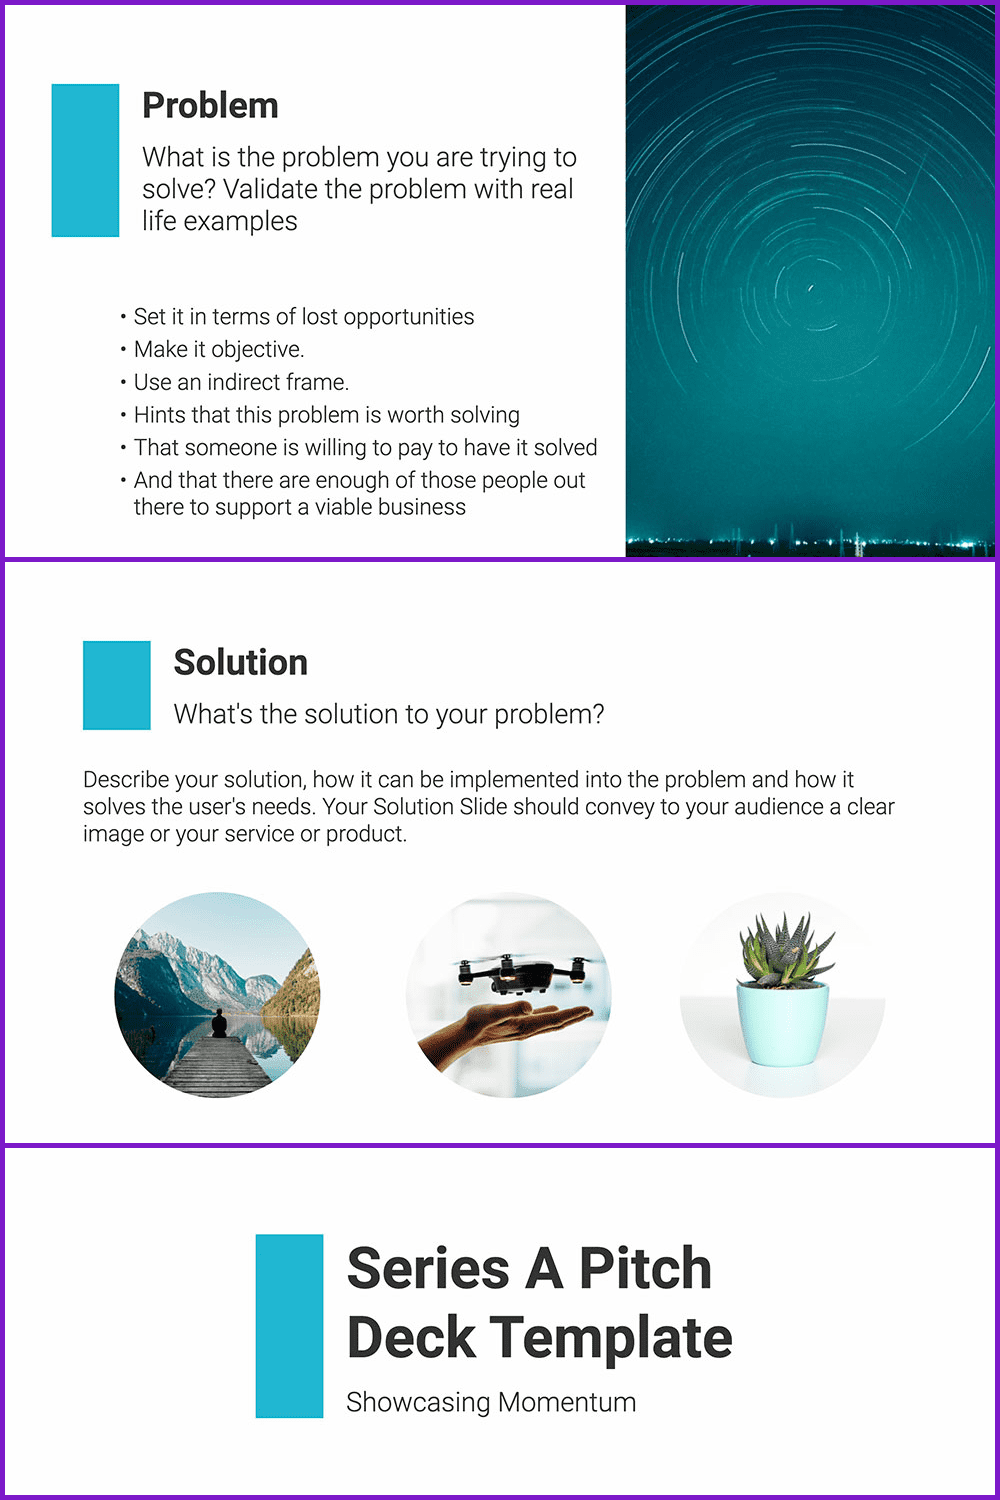 Simple minimalistic slides with good visible text.